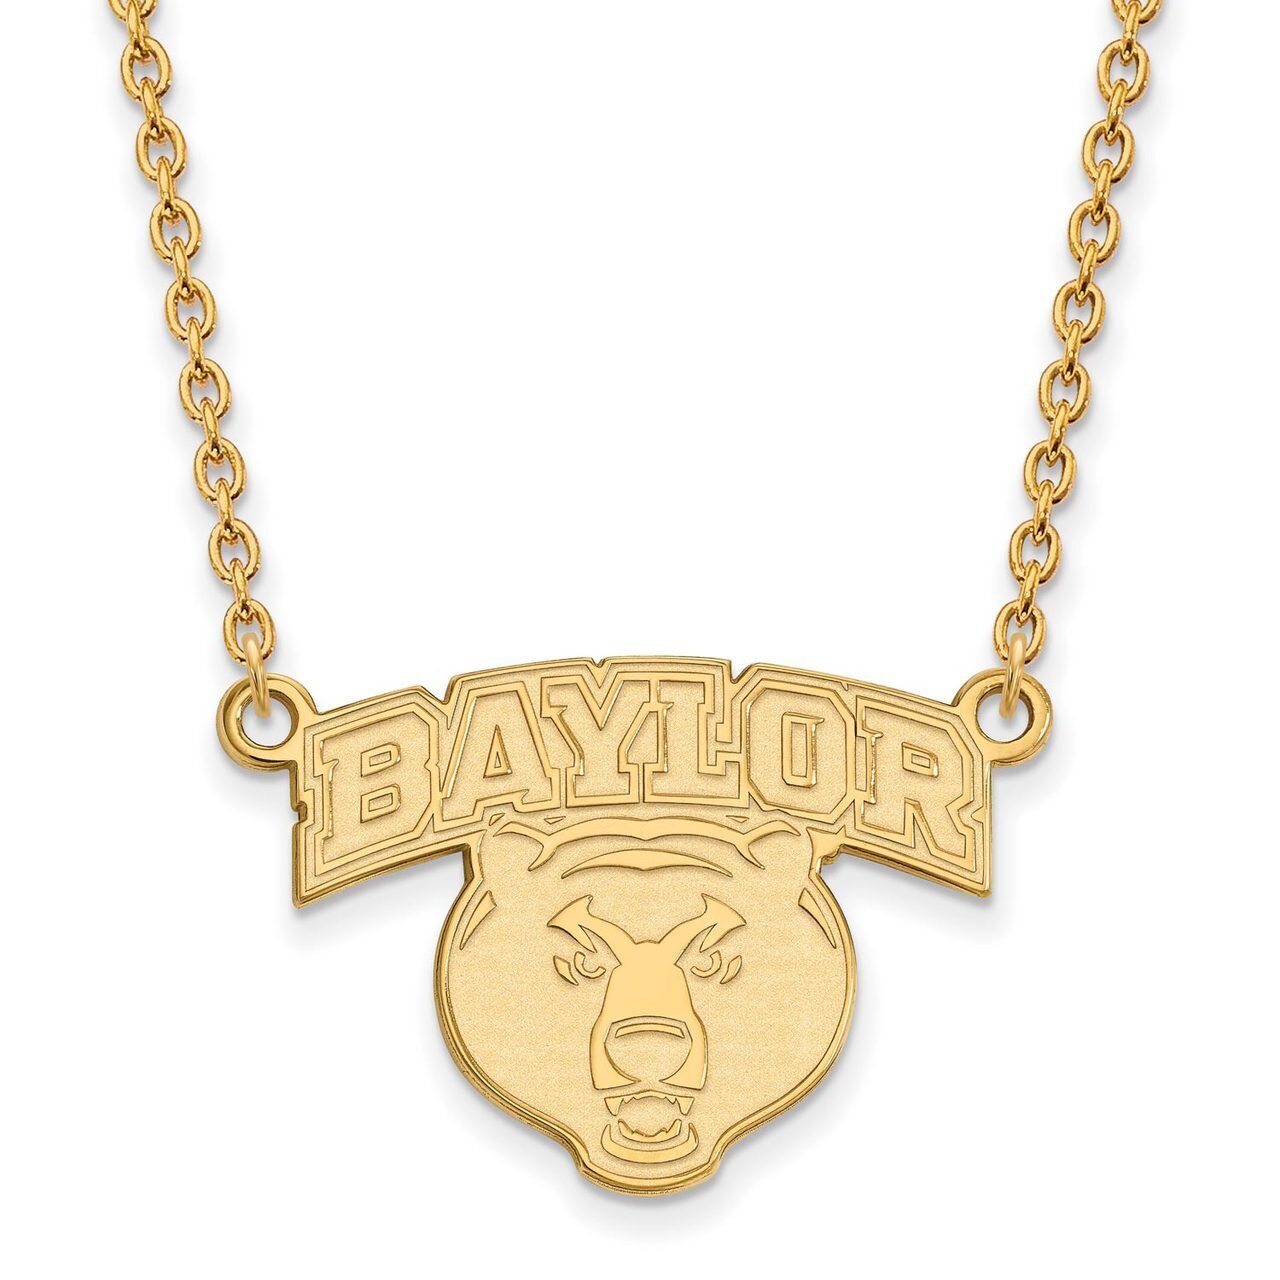 Baylor University Large Pendant with Chain Necklace 14k Yellow Gold 4Y031BU-18